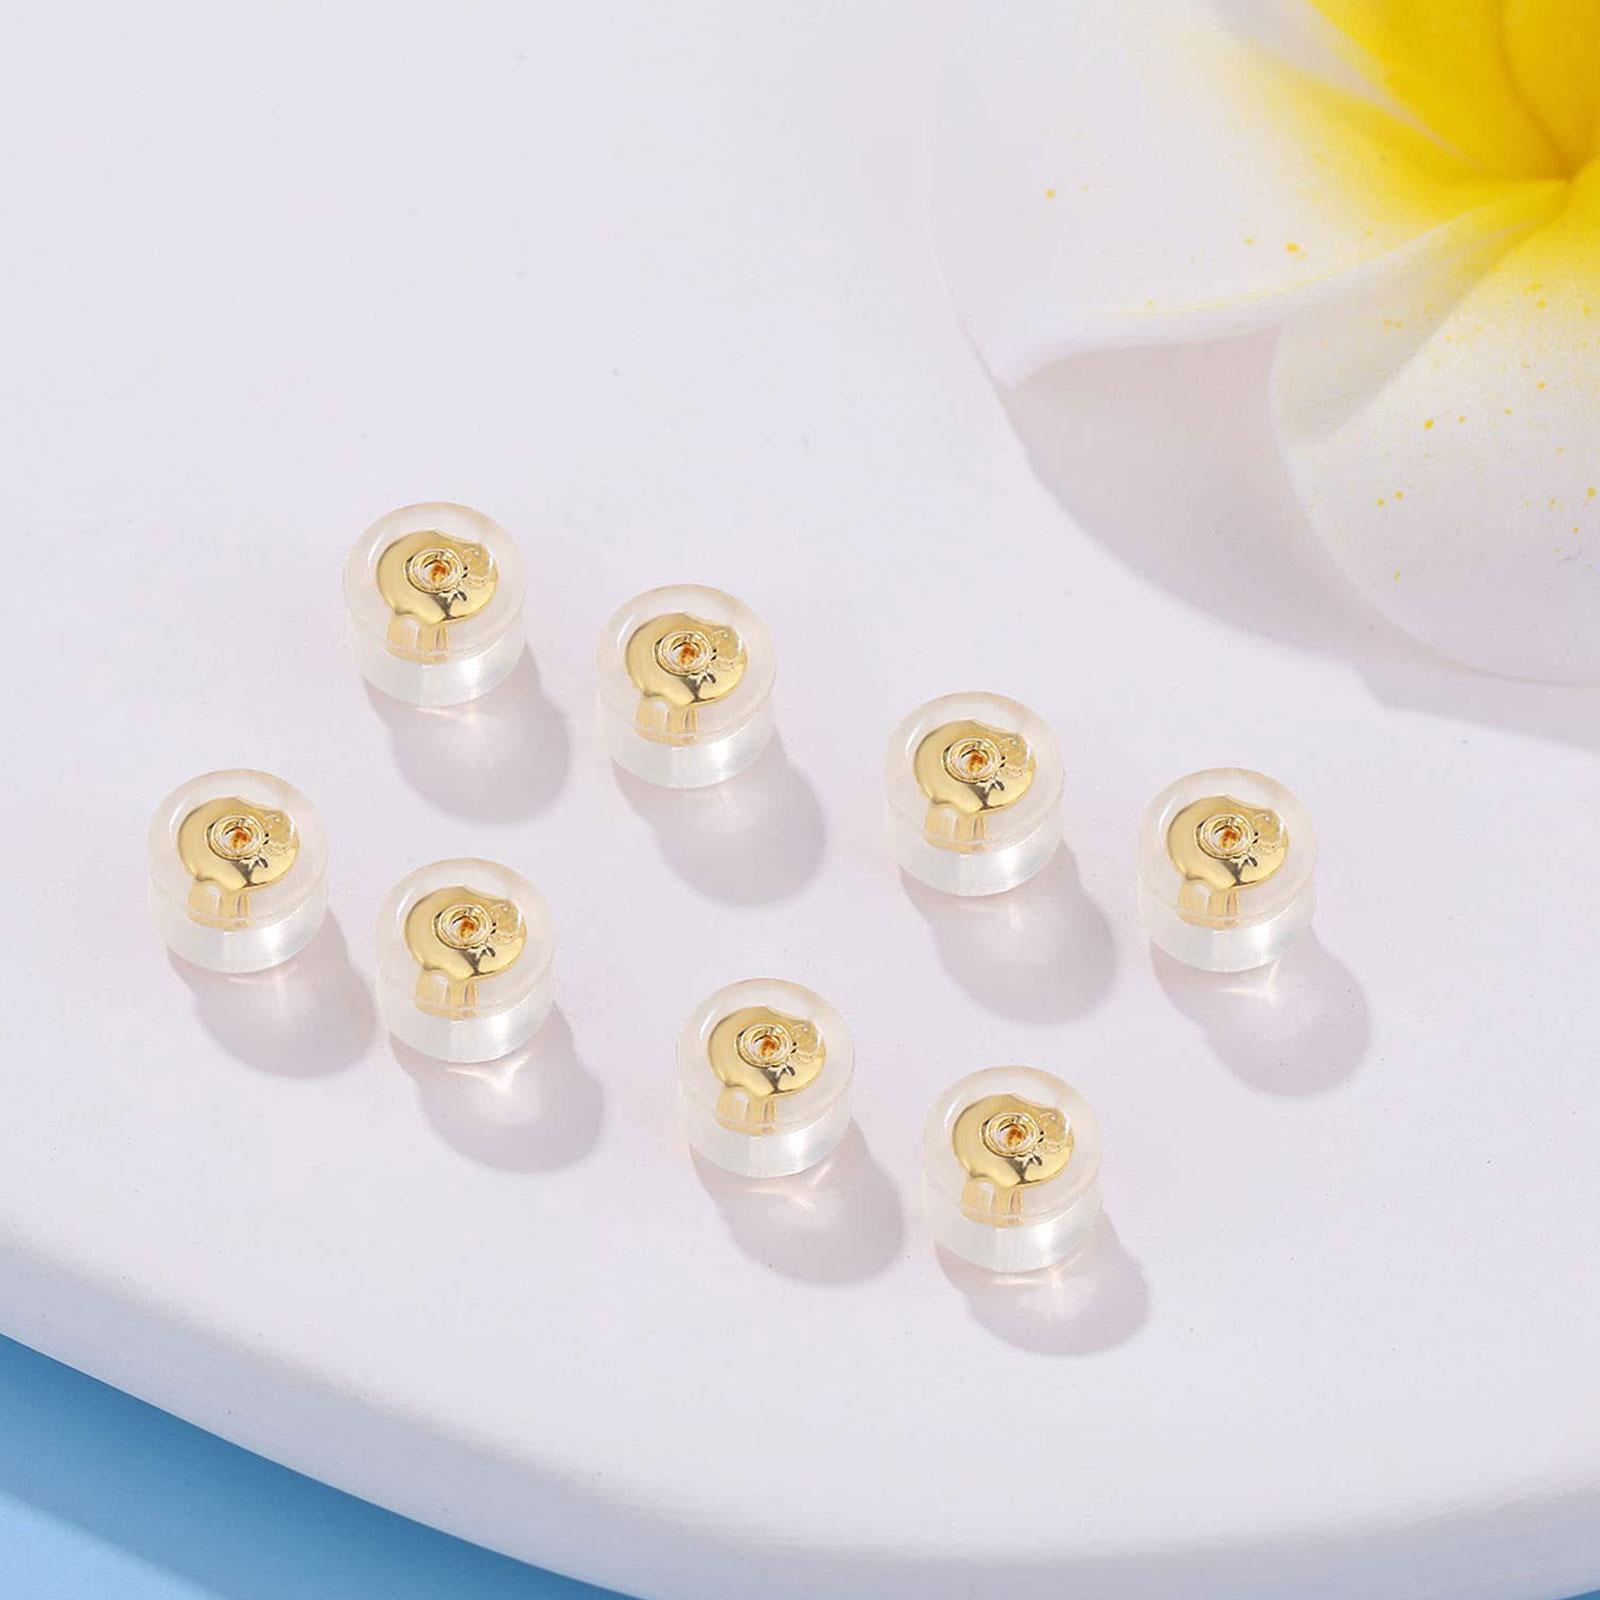 ESMATOO Earring Backs, Rubber Earring Backs for Studs and Droopy Ears ,  Hypoallergenic Comfort Small Gold & White Gold Silicone Earring Backs ( 3